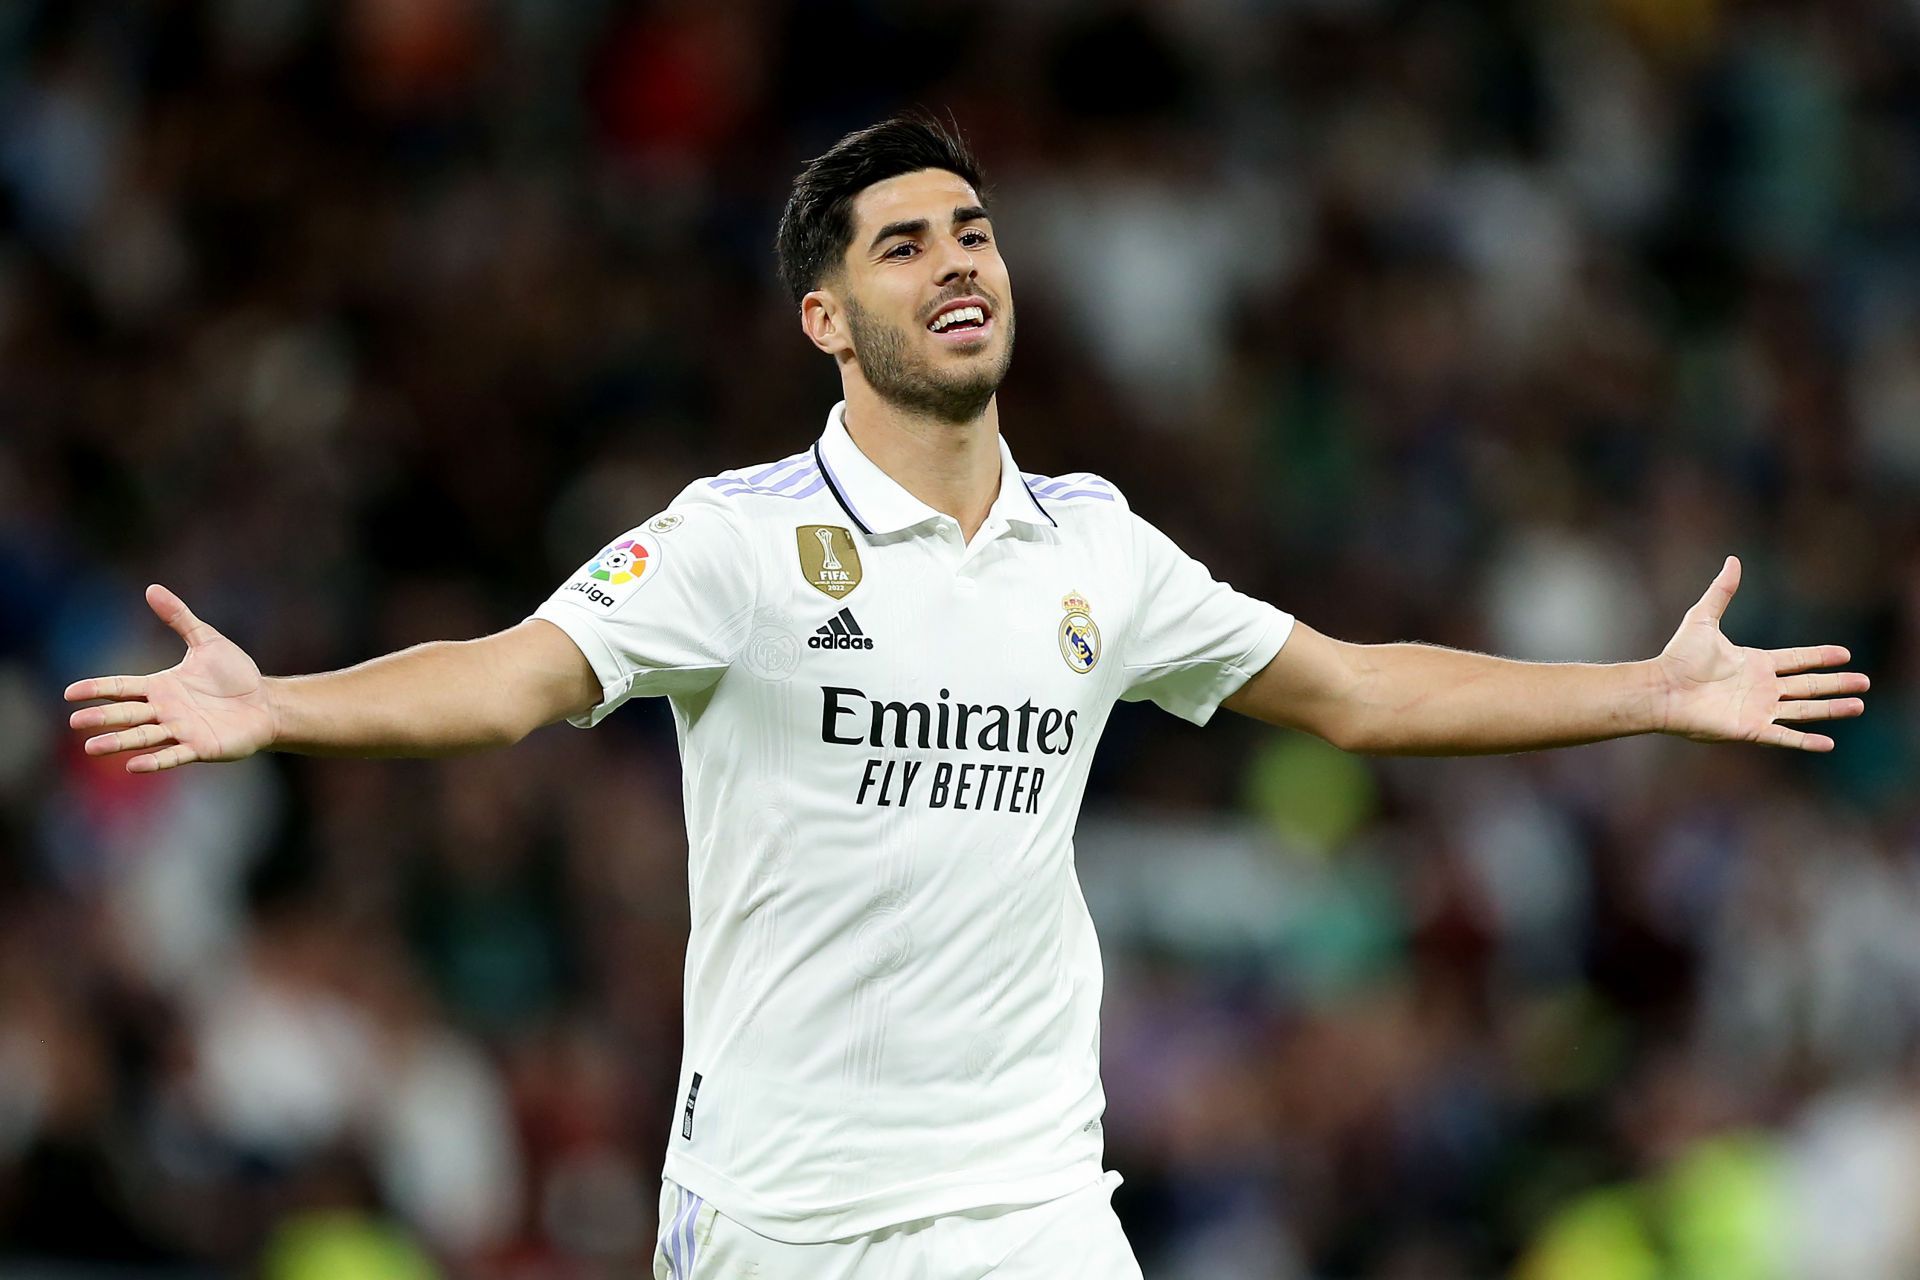 Marco Asensio turned down a chance to move to Anfield this summer.